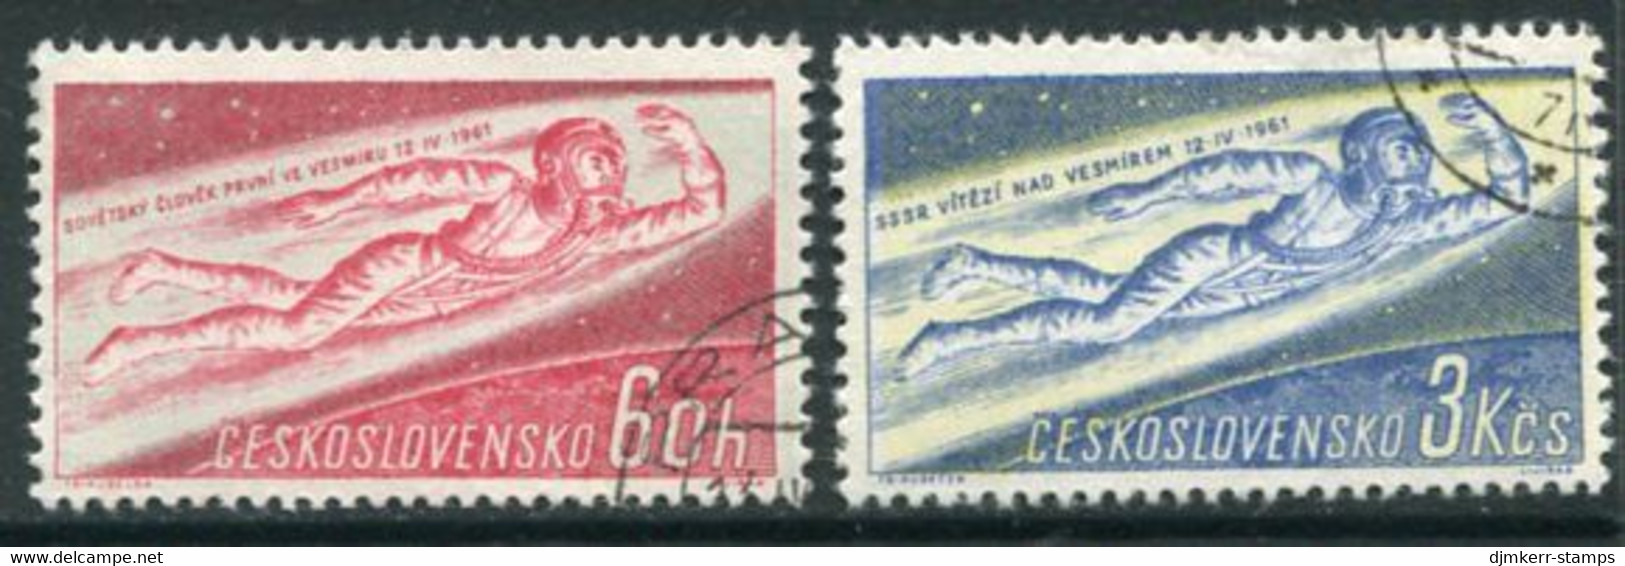 CZECHOSLOVAKIA 1961 Launch Of Manned Space Flight Used.  Michel 1263-64 - Gebraucht